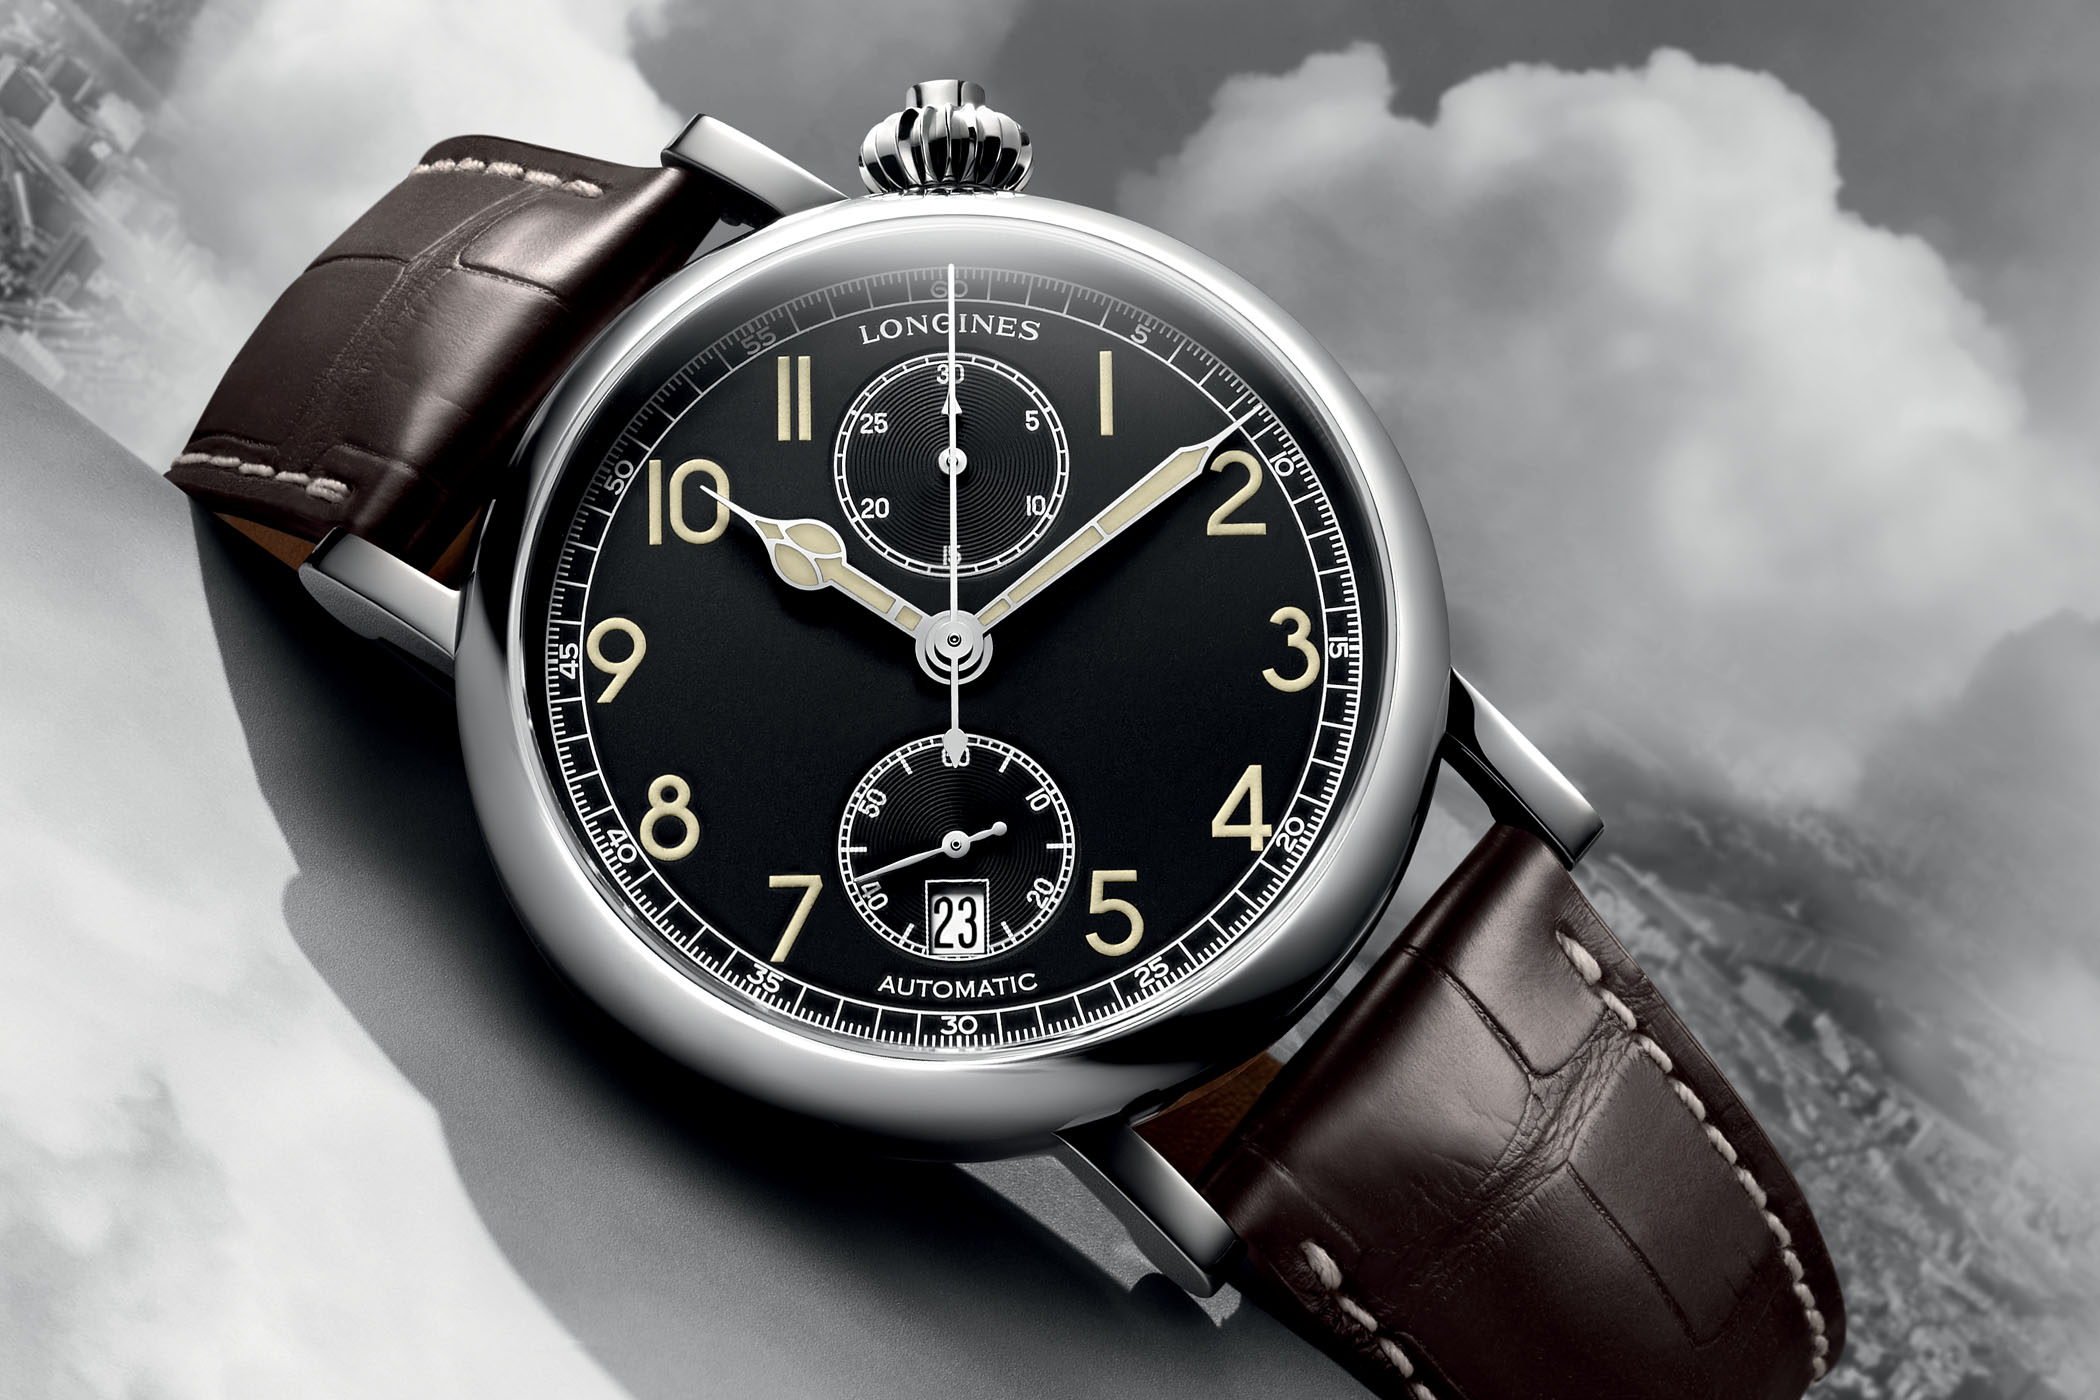 The Longines Avigation Watch Type A-7 1935 - 2020 model